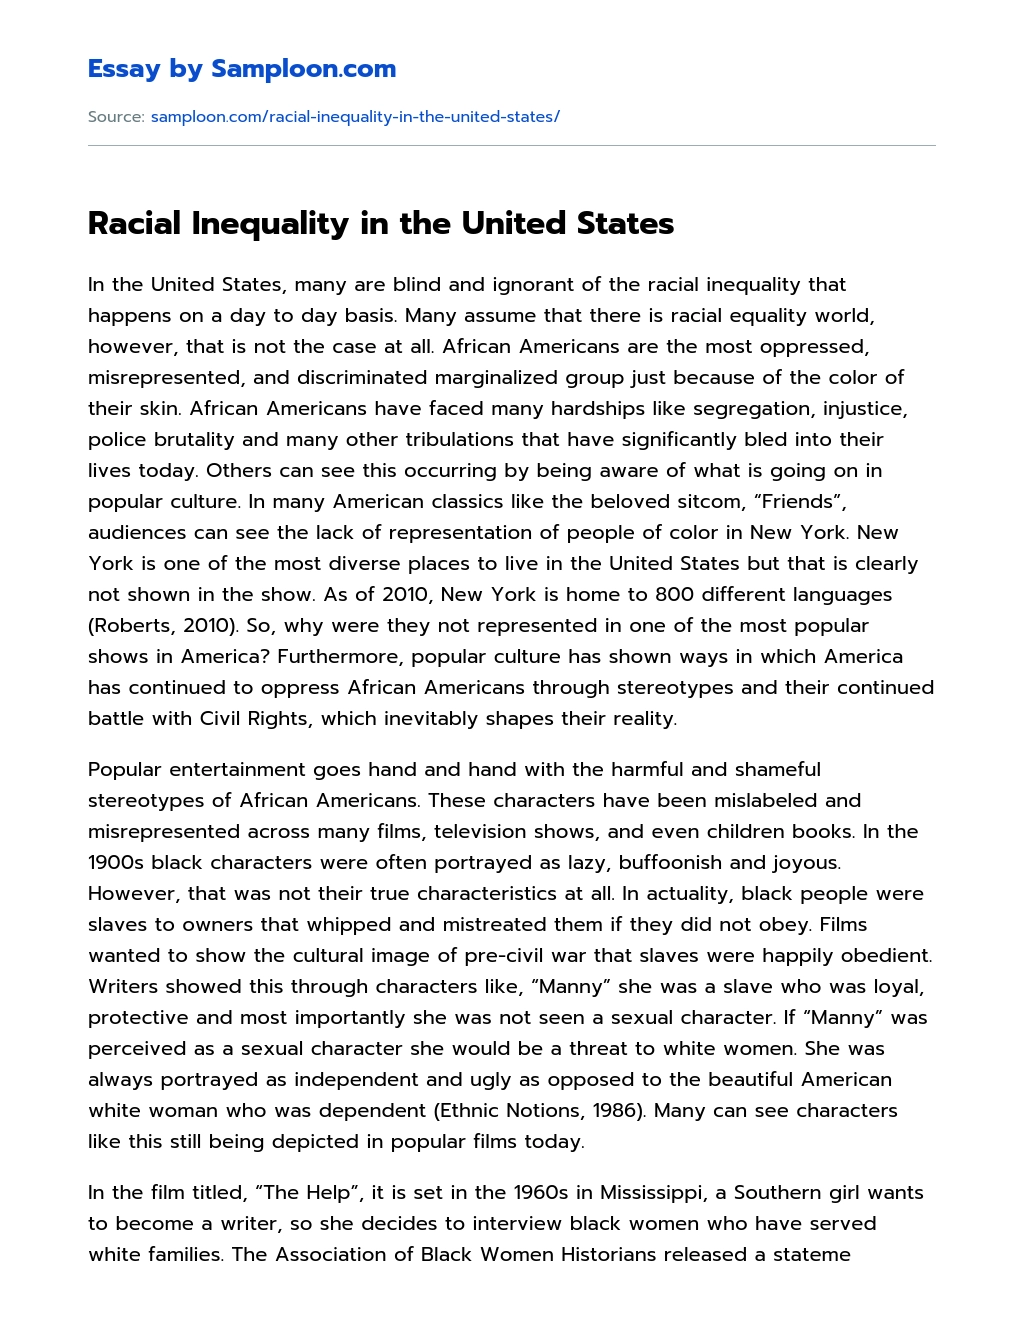 Racial Inequality in the United States essay